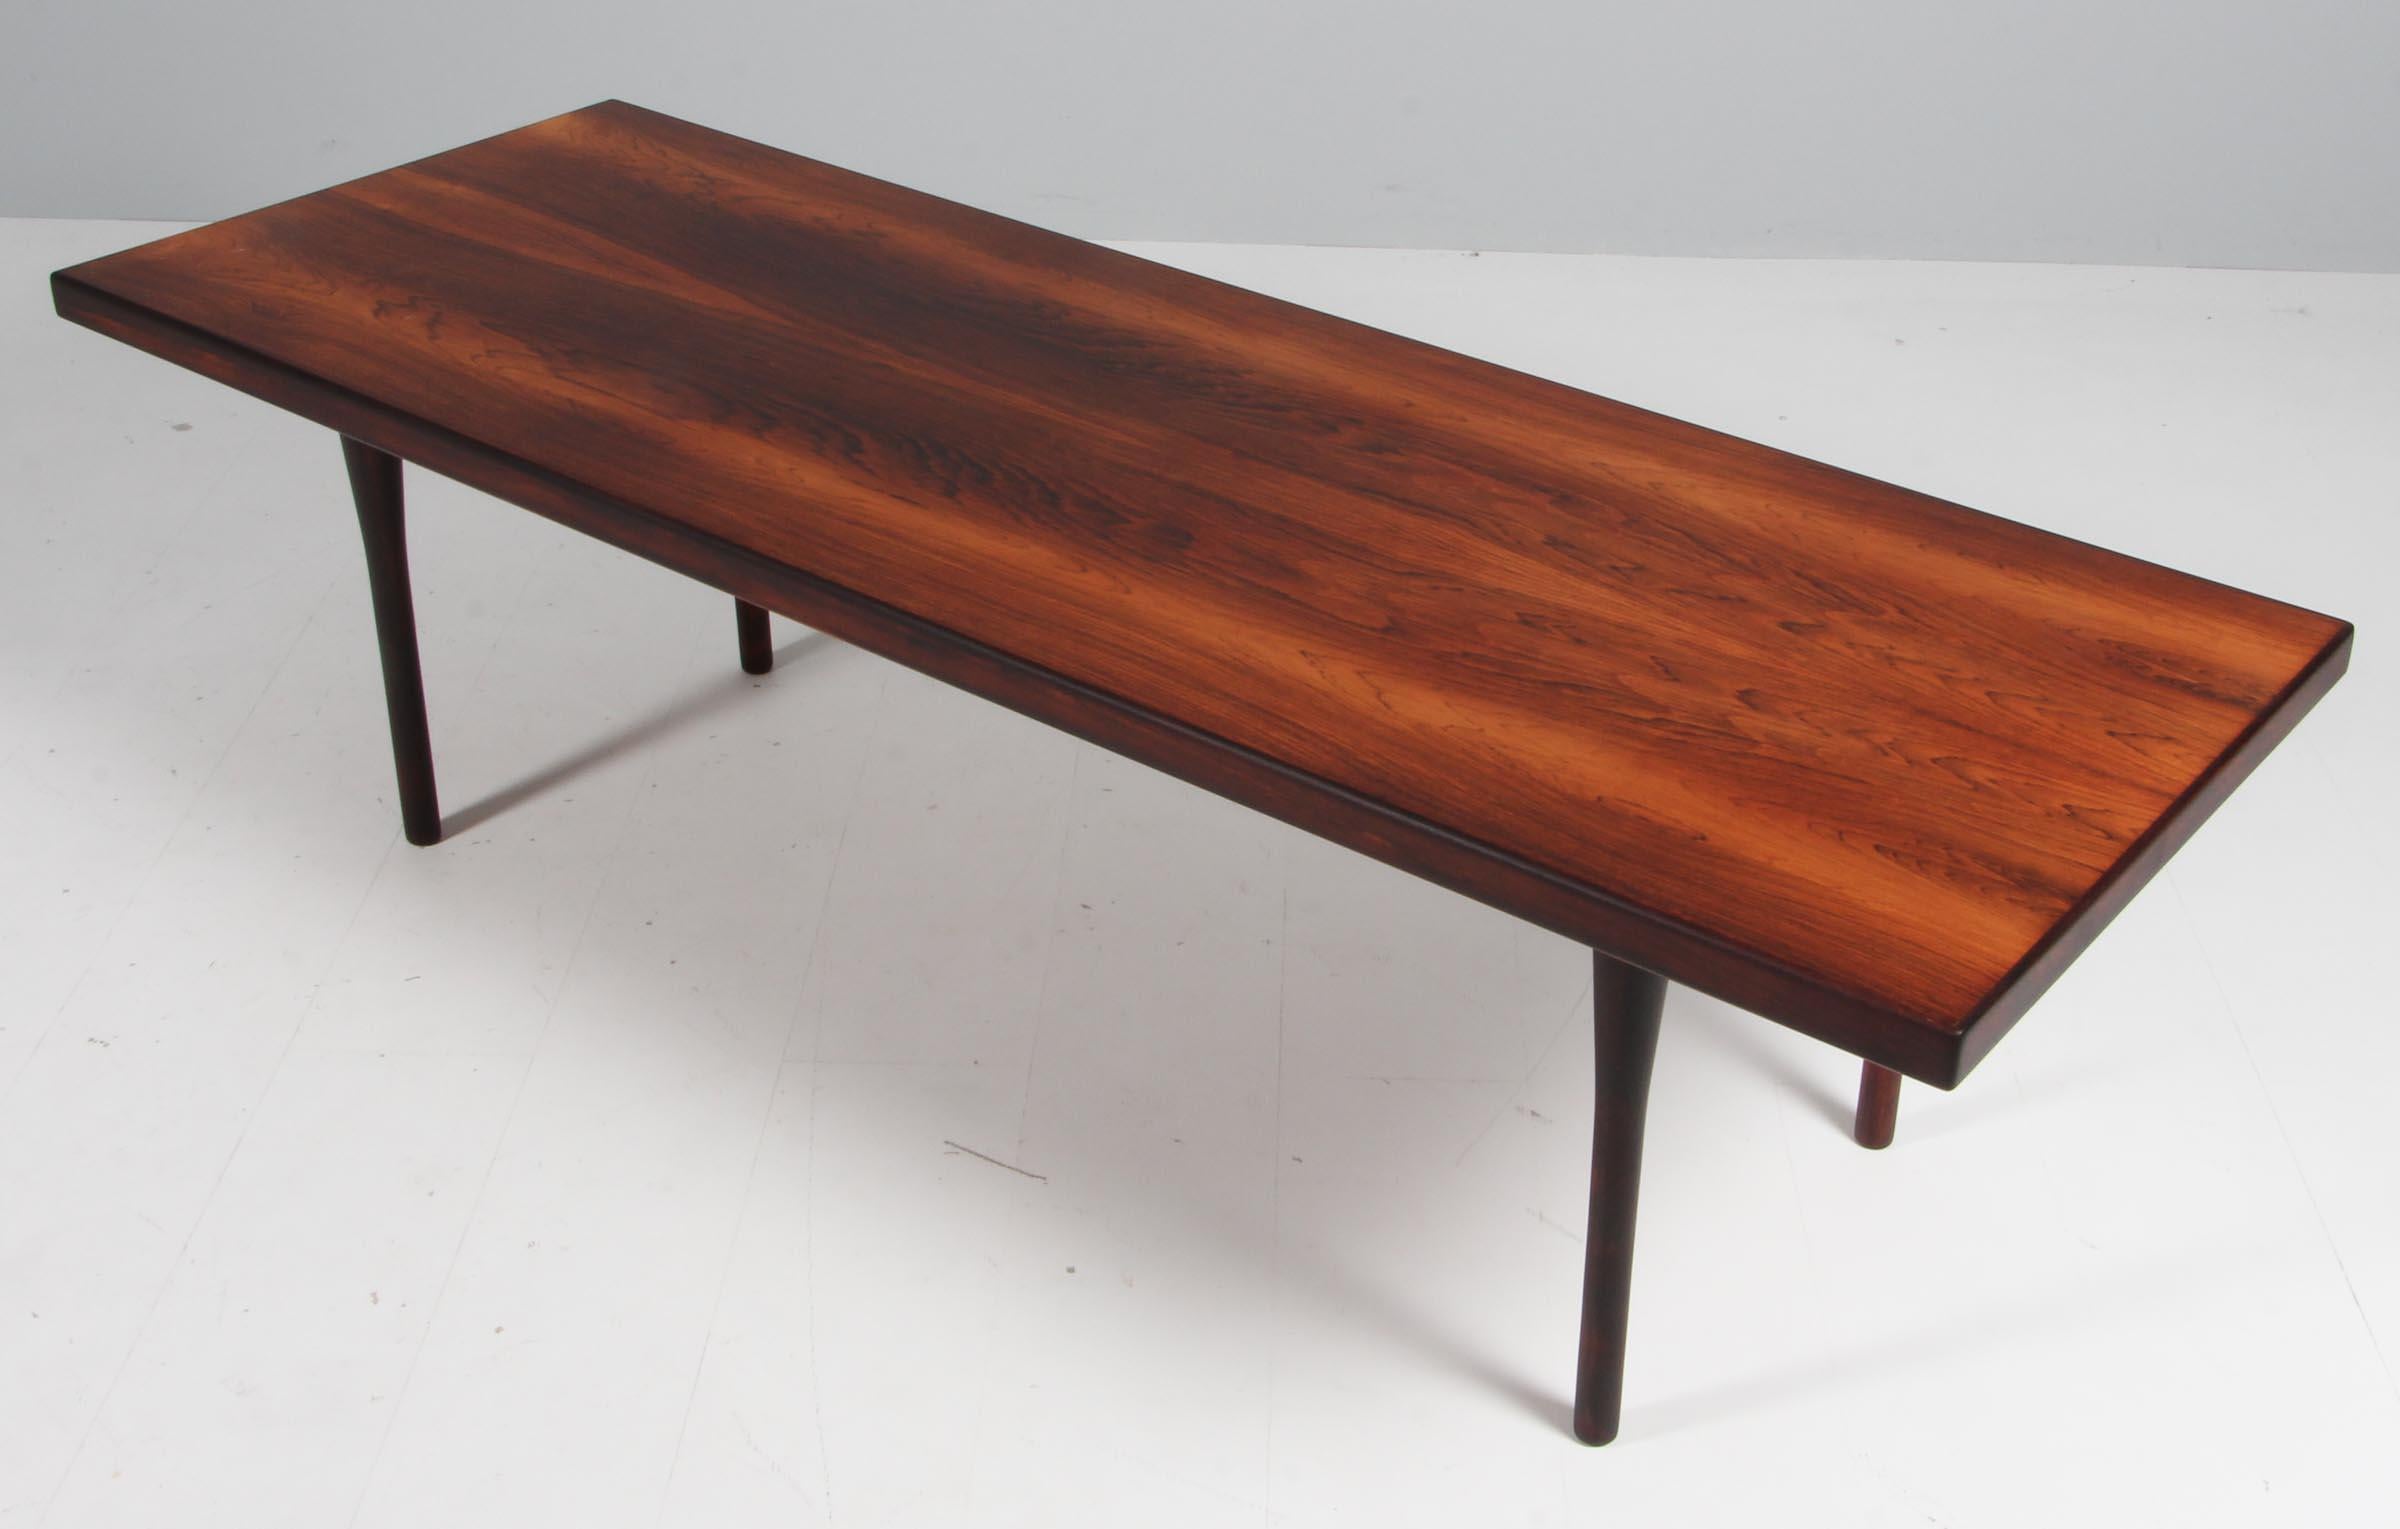 Illum Wikkelsø coffee table veneered in rosewood.

Tapered solid rosewood legs.

Great condition, legs can be removed for easy and secure shipping.